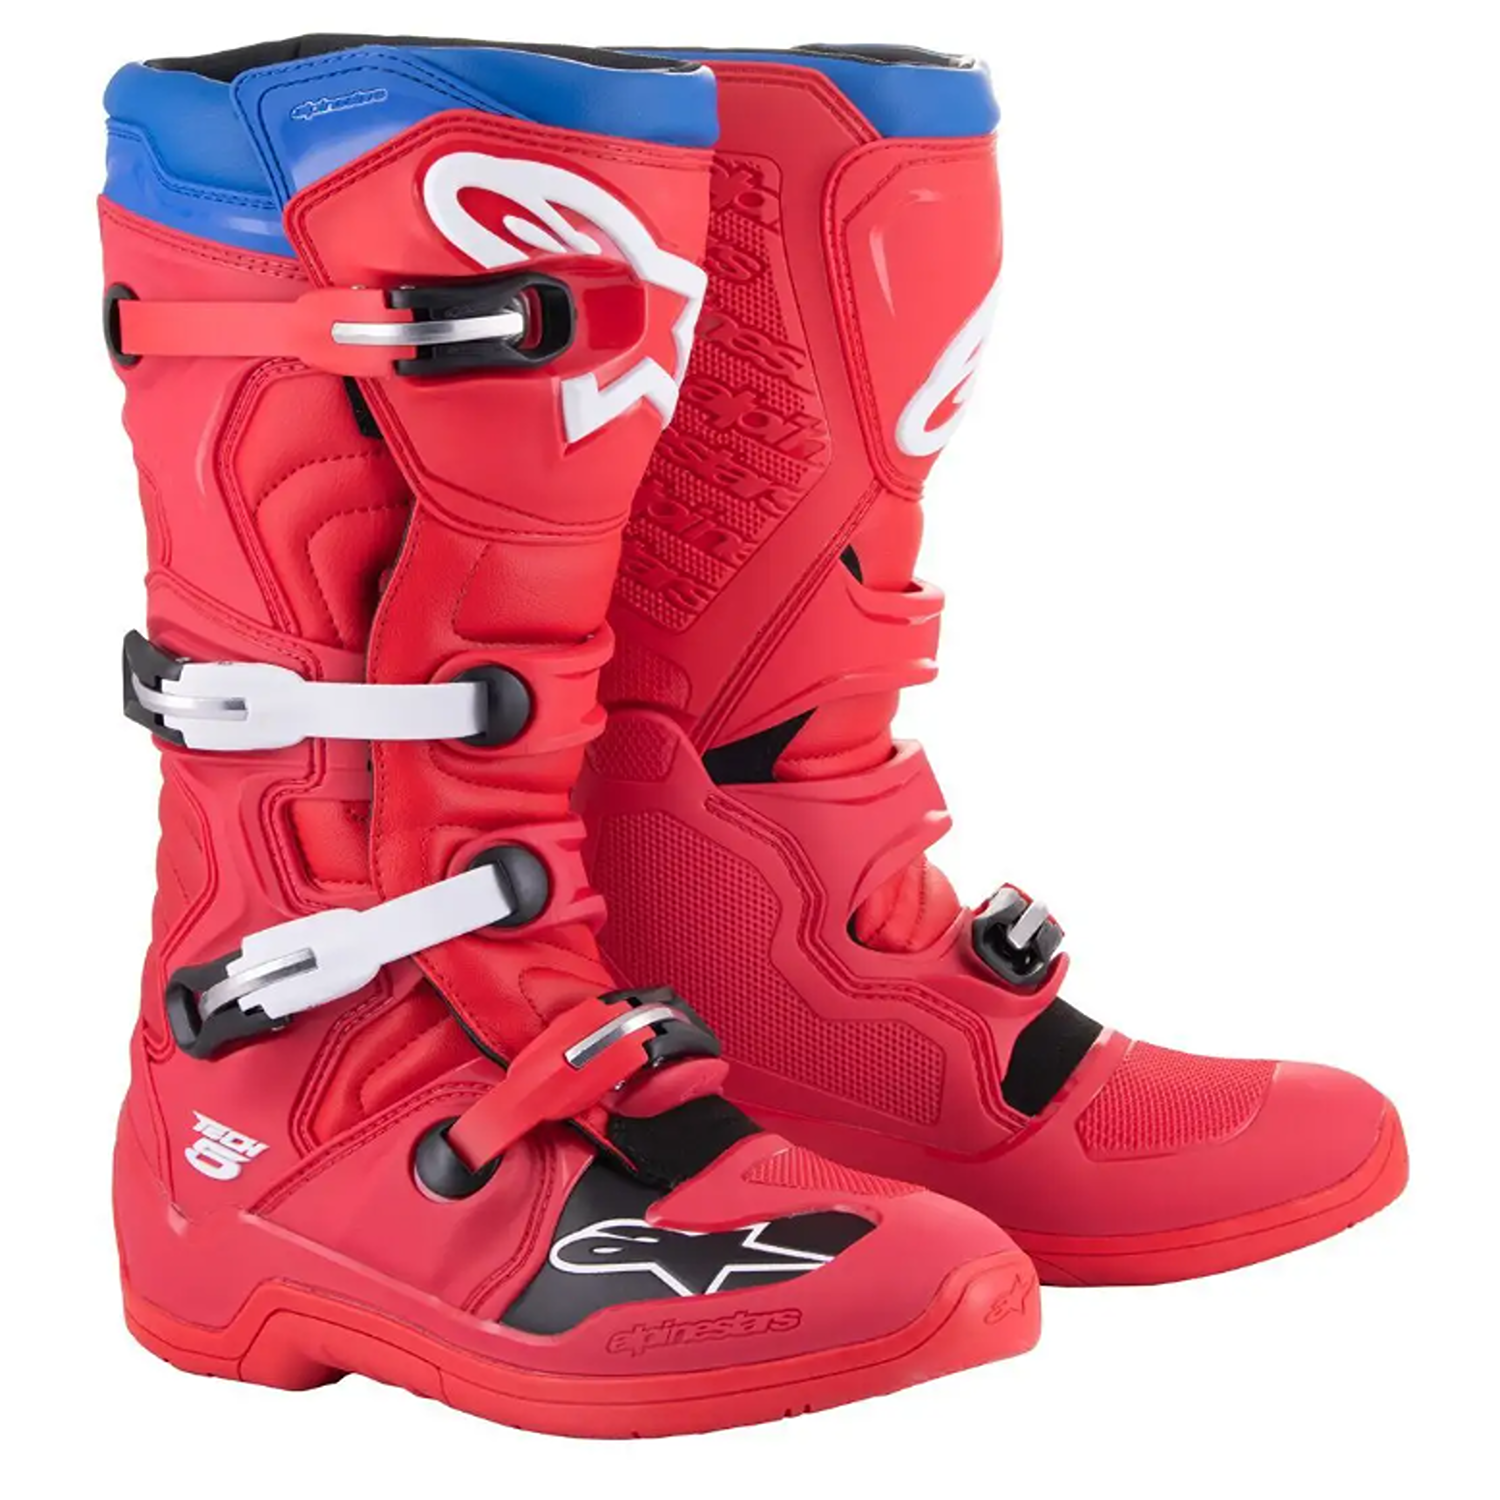 Image of EU Alpinestars Tech 5 Boots Bright Red Dark Red Blue Taille US 6